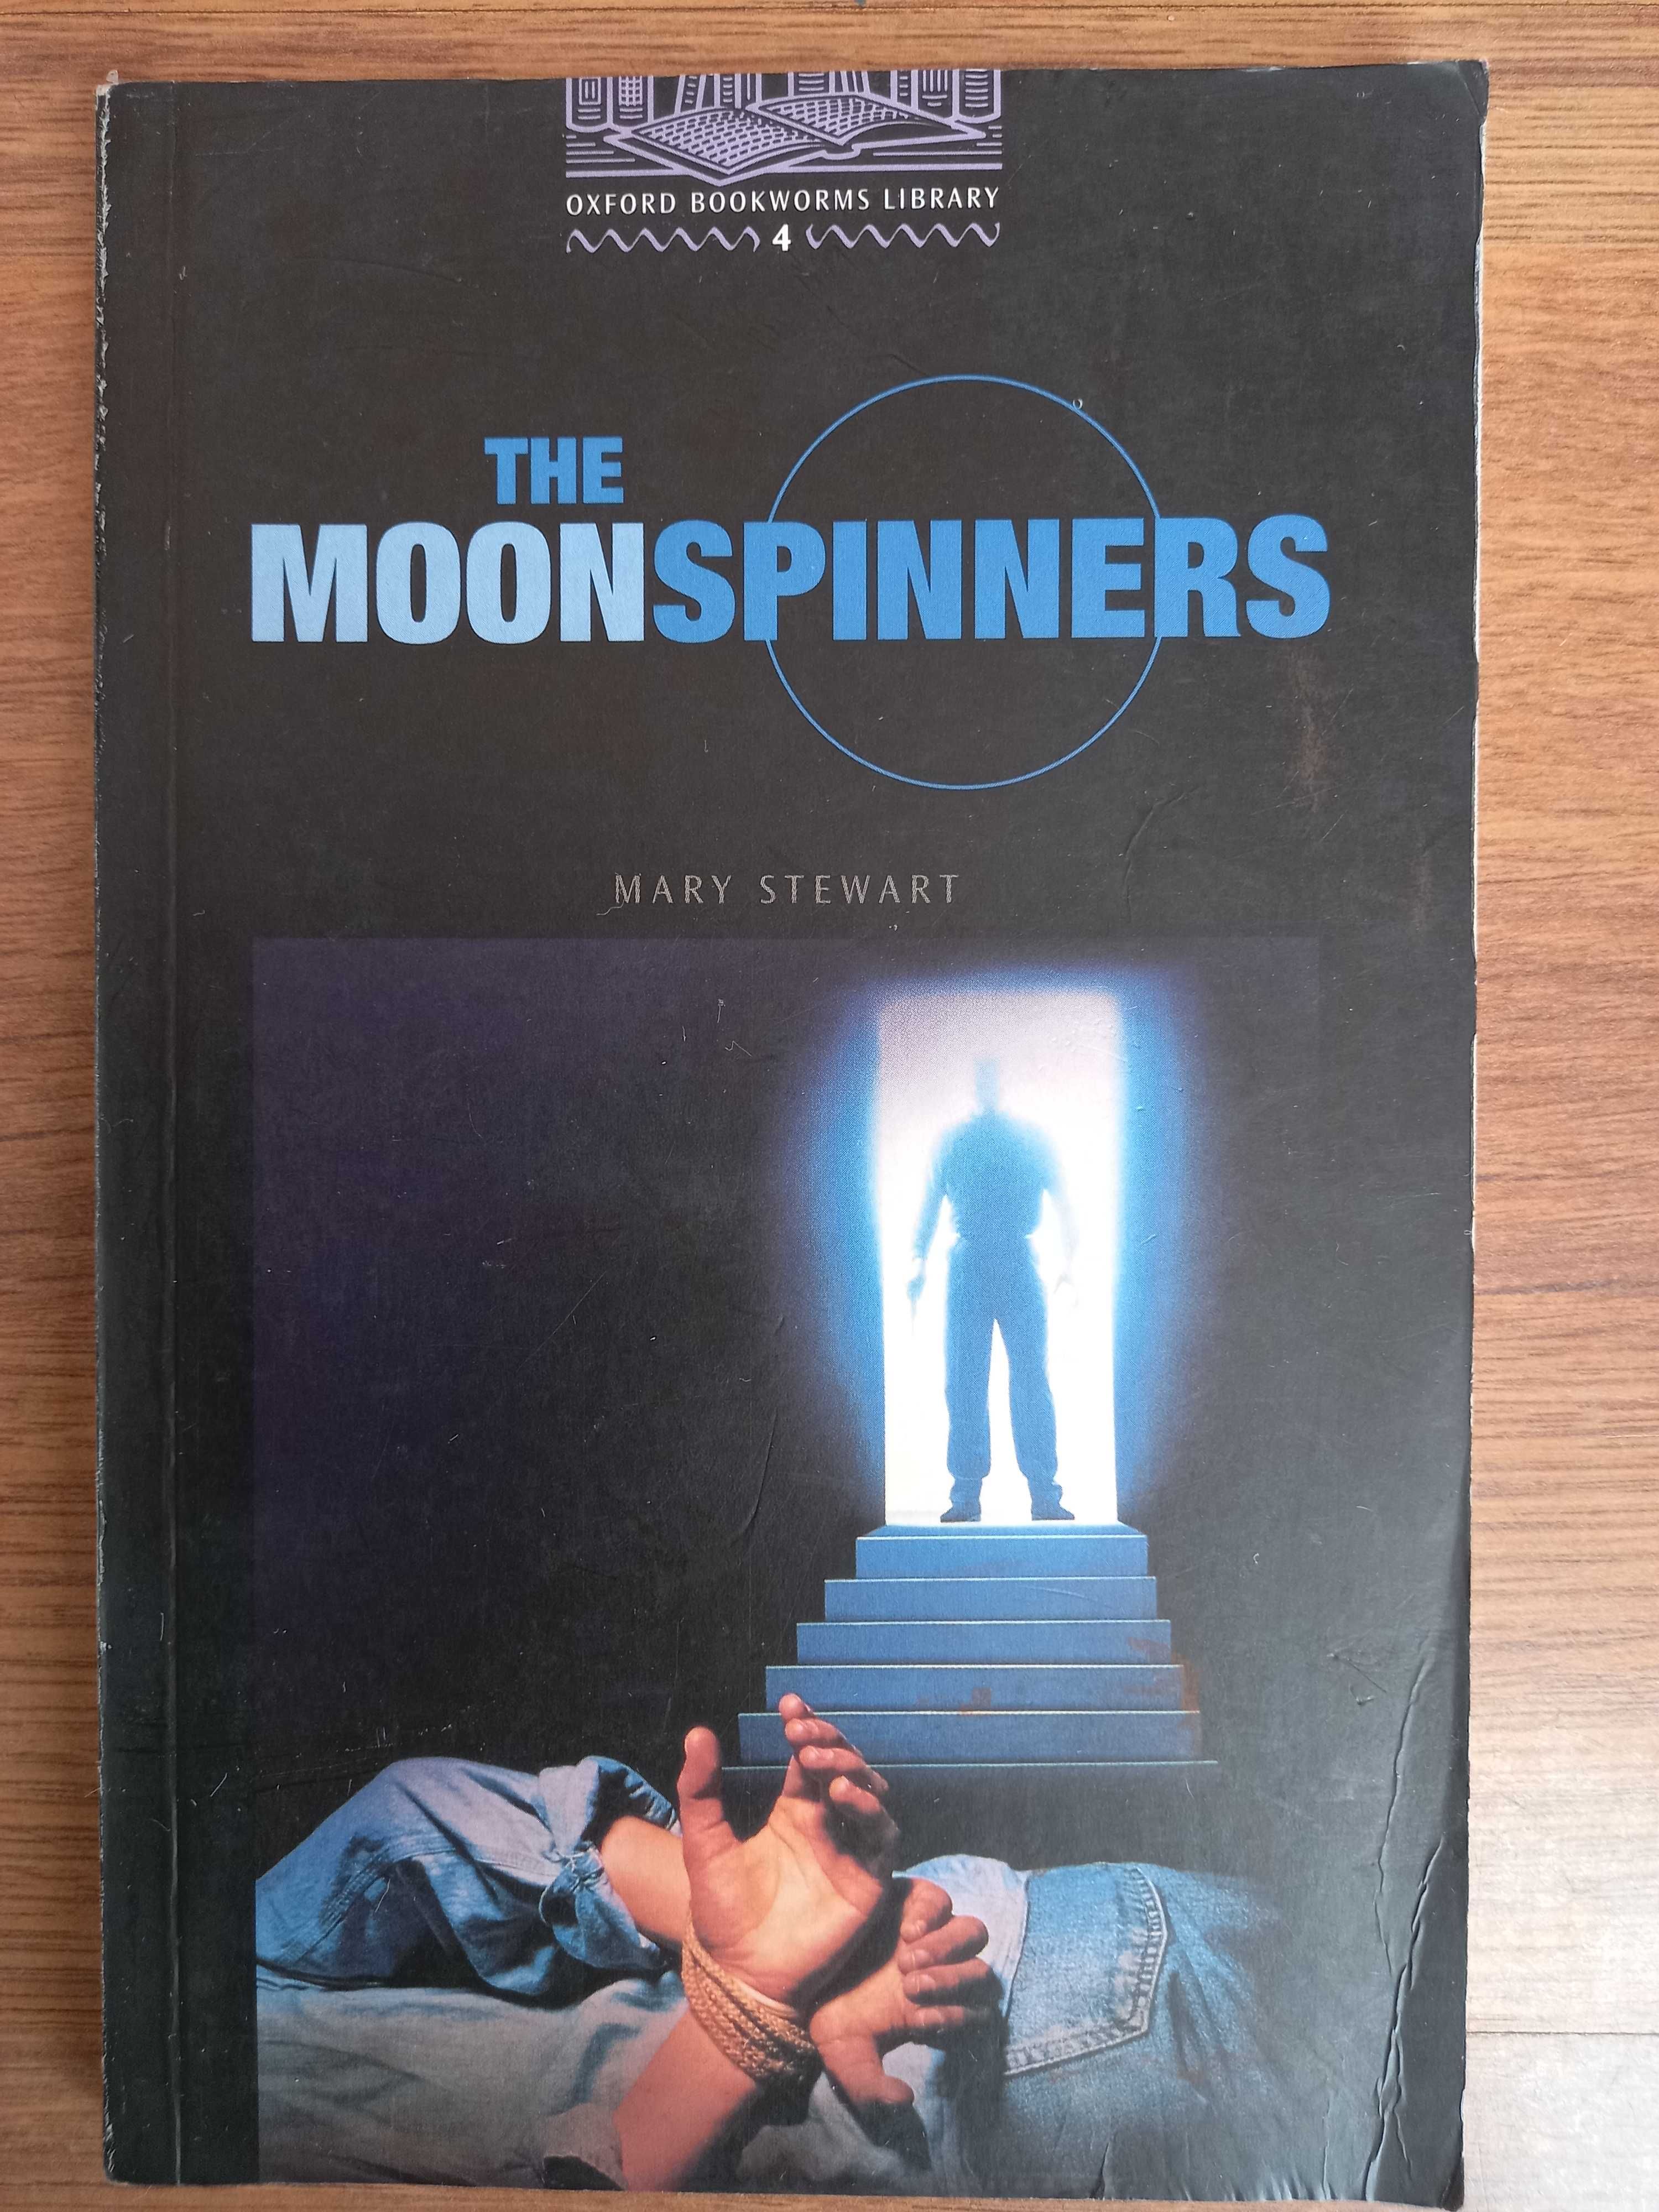 The Moon Spinners - Mary Stewart